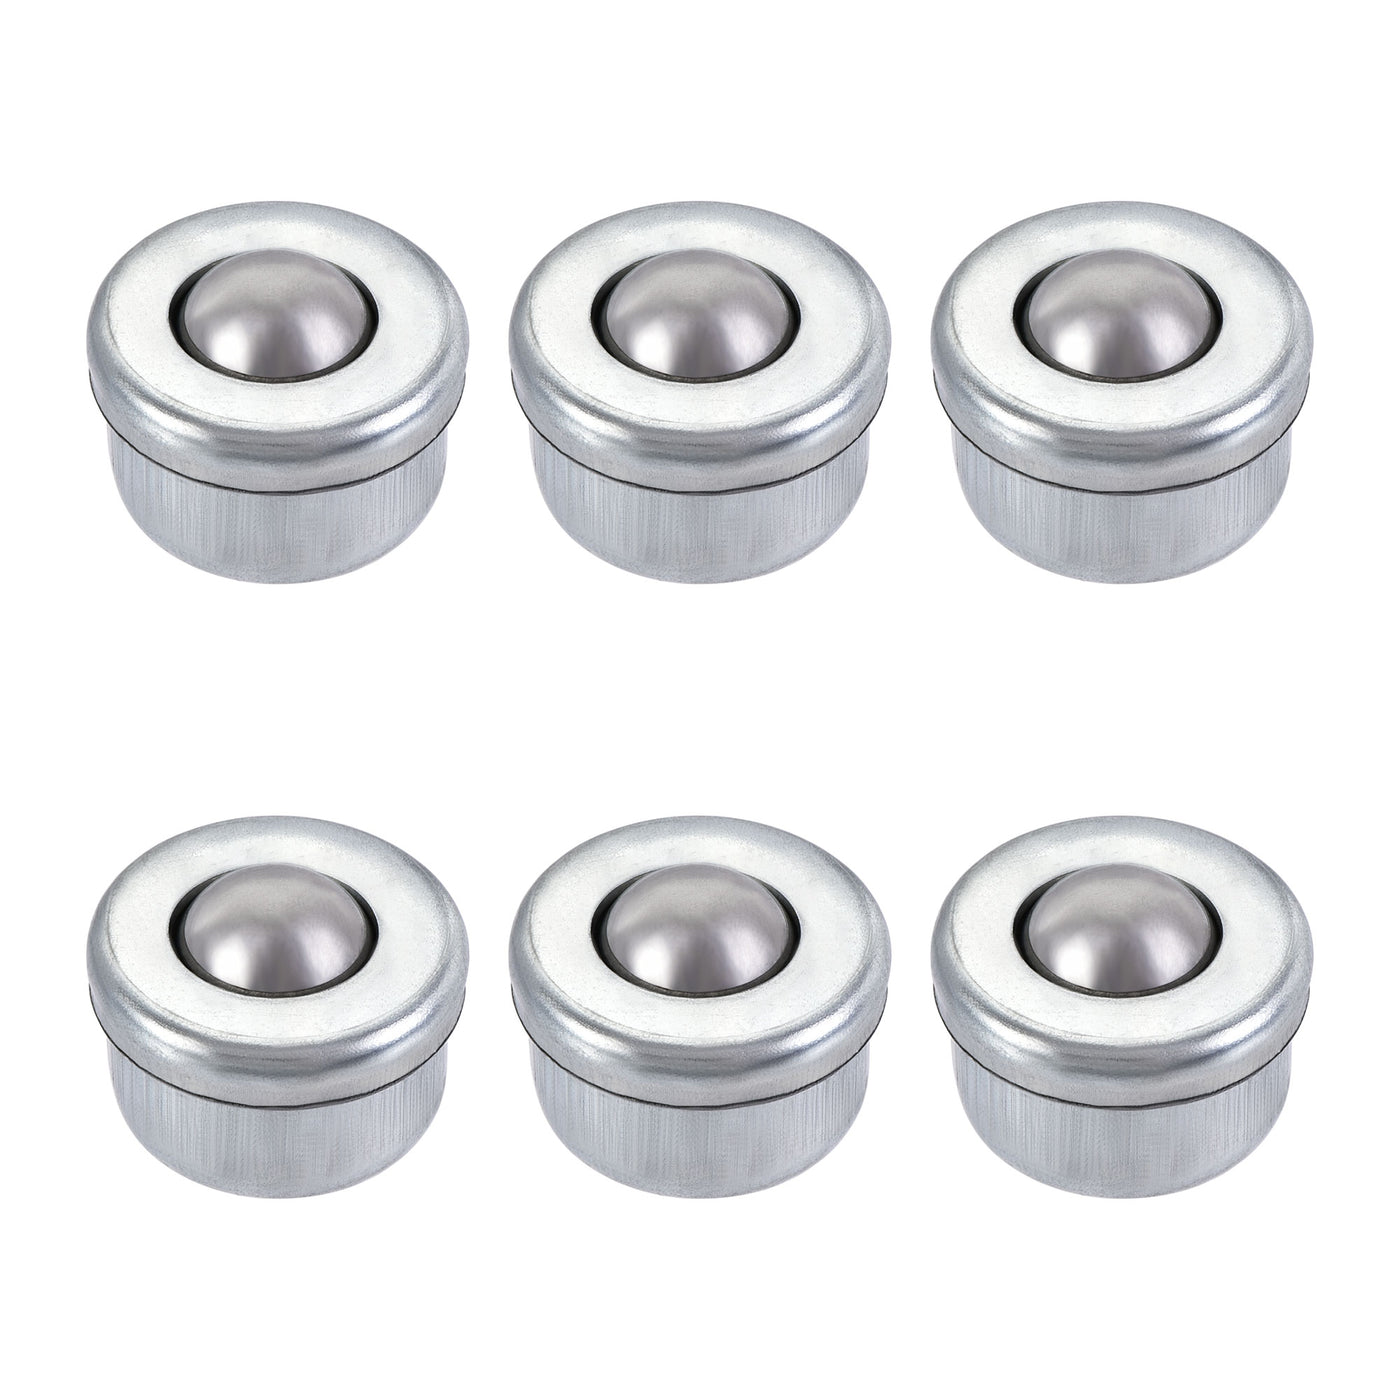 uxcell Uxcell Ball Transfer Bearing Unit 8mm 6.6Lbs Carbon Steel Drop-in Type for Transmission 6pcs